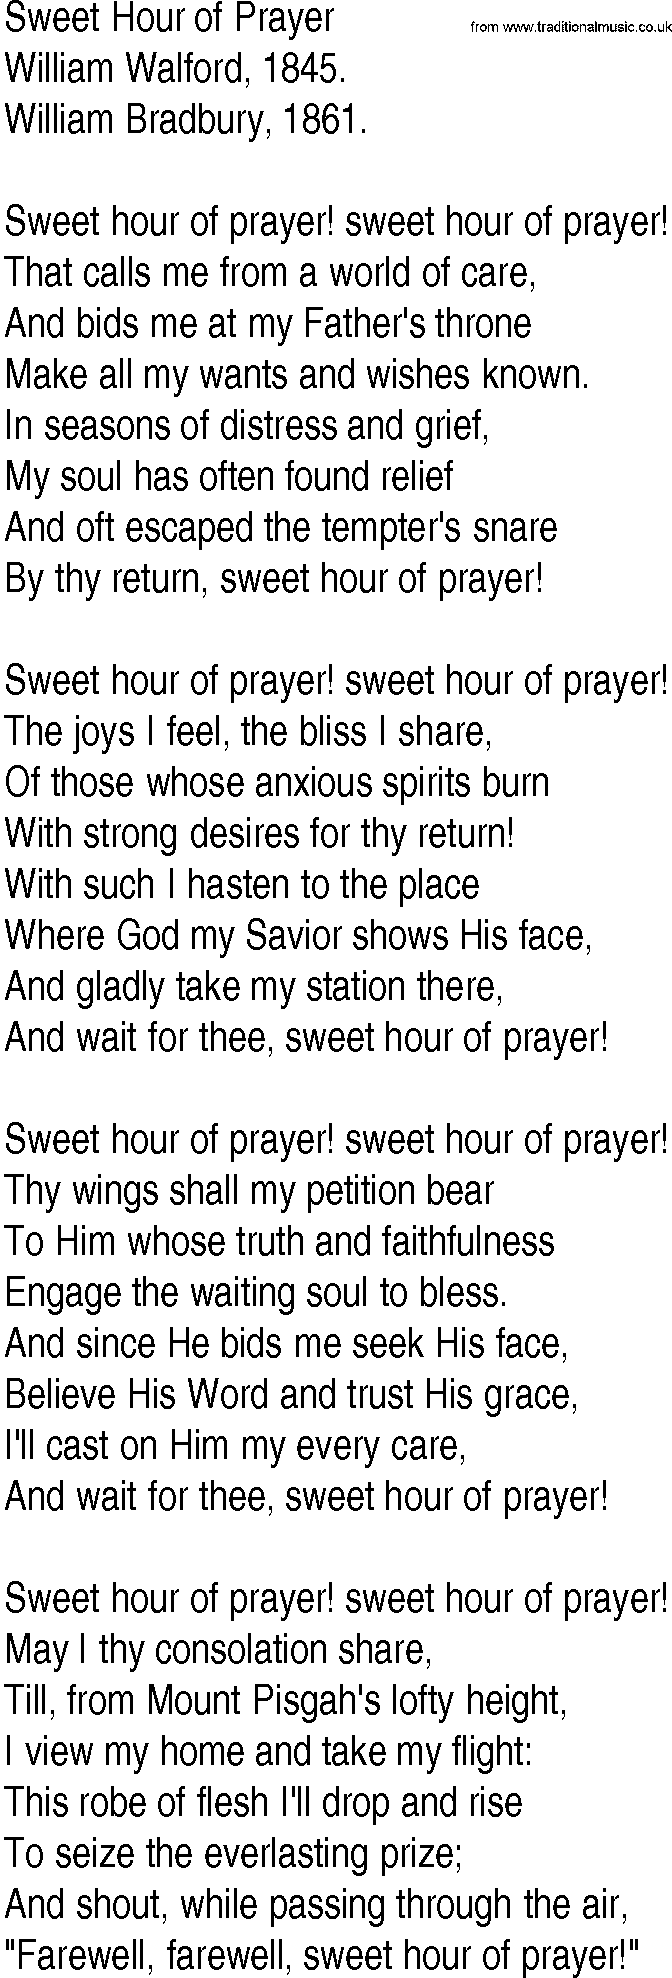 Hymn and Gospel Song: Sweet Hour of Prayer by William Walford lyrics